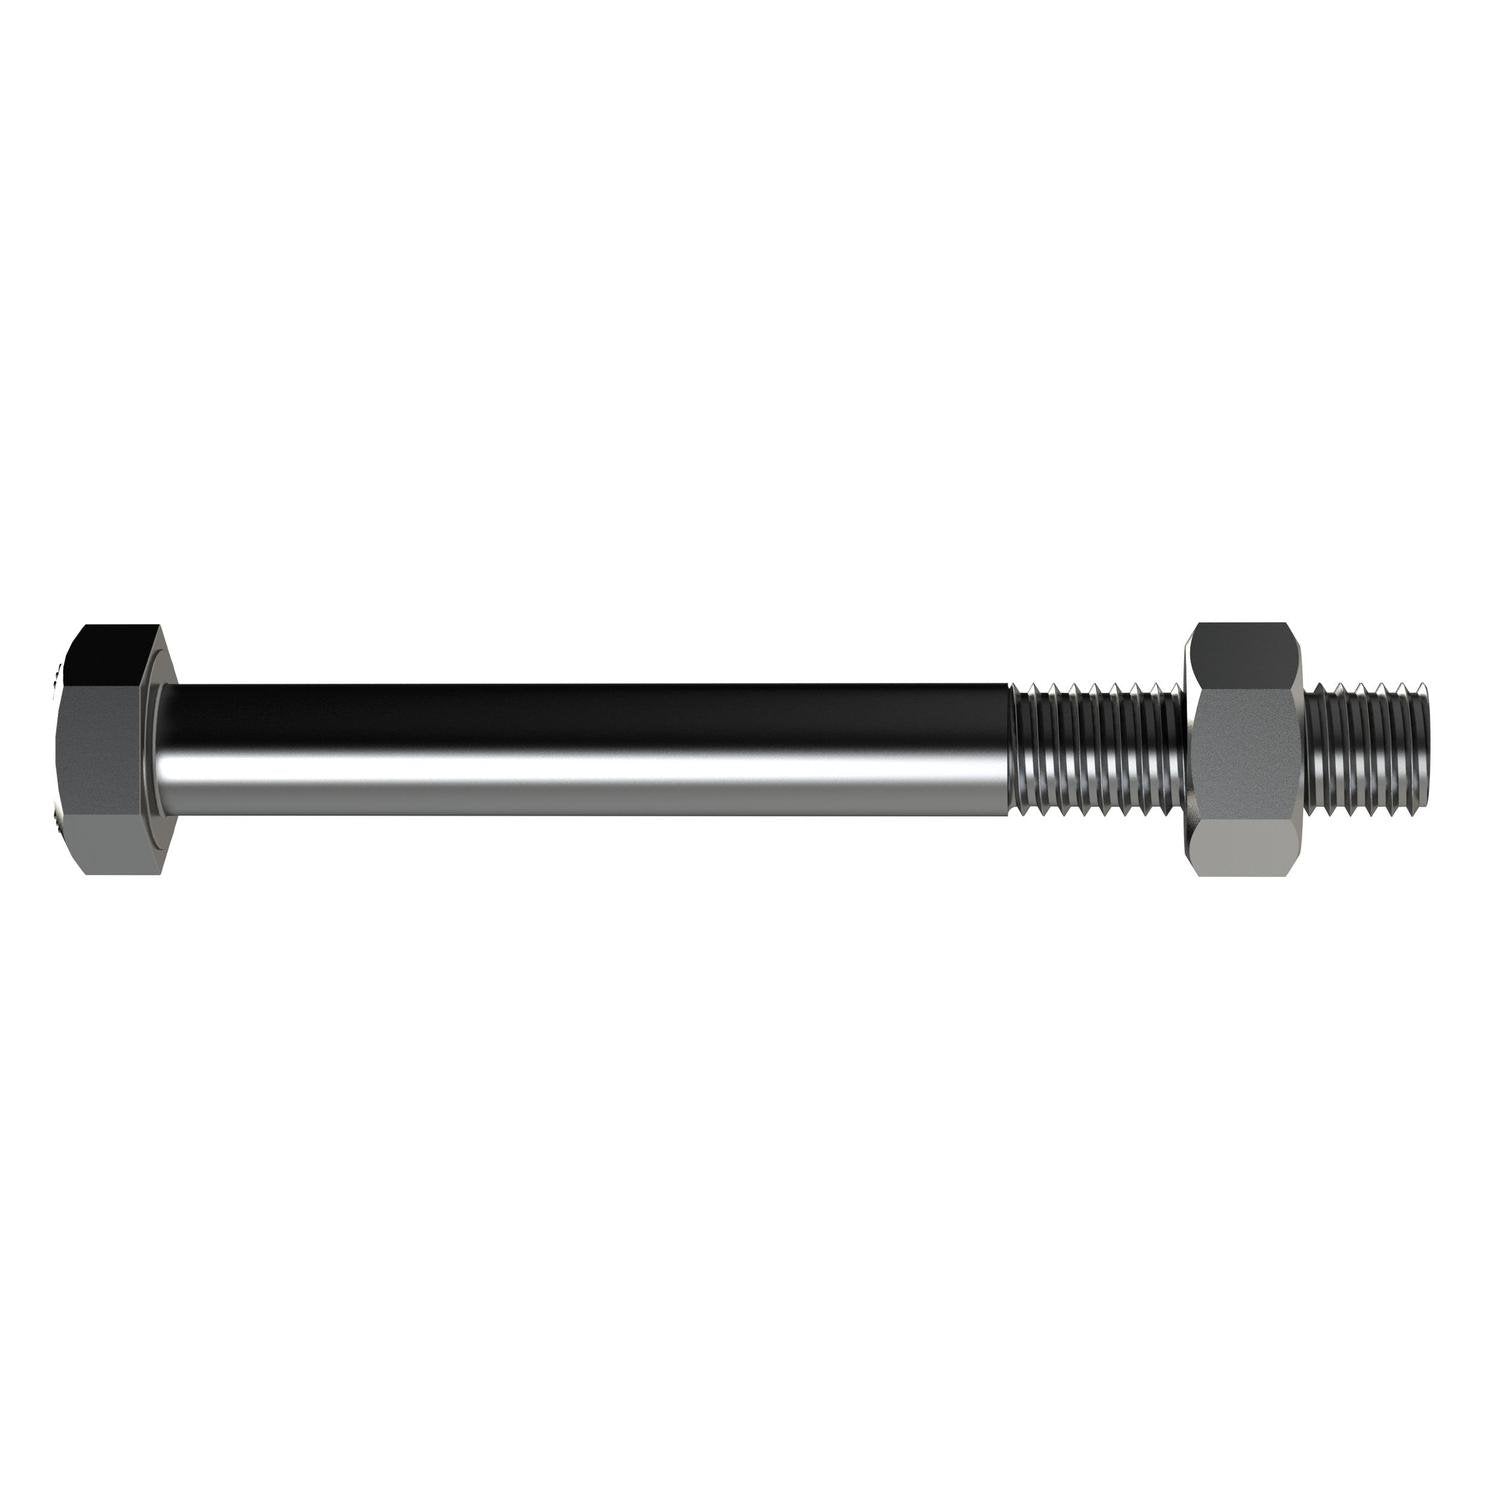 Bremick Engineer Bolt & Nut M12 X 220Mm Stainless Steel